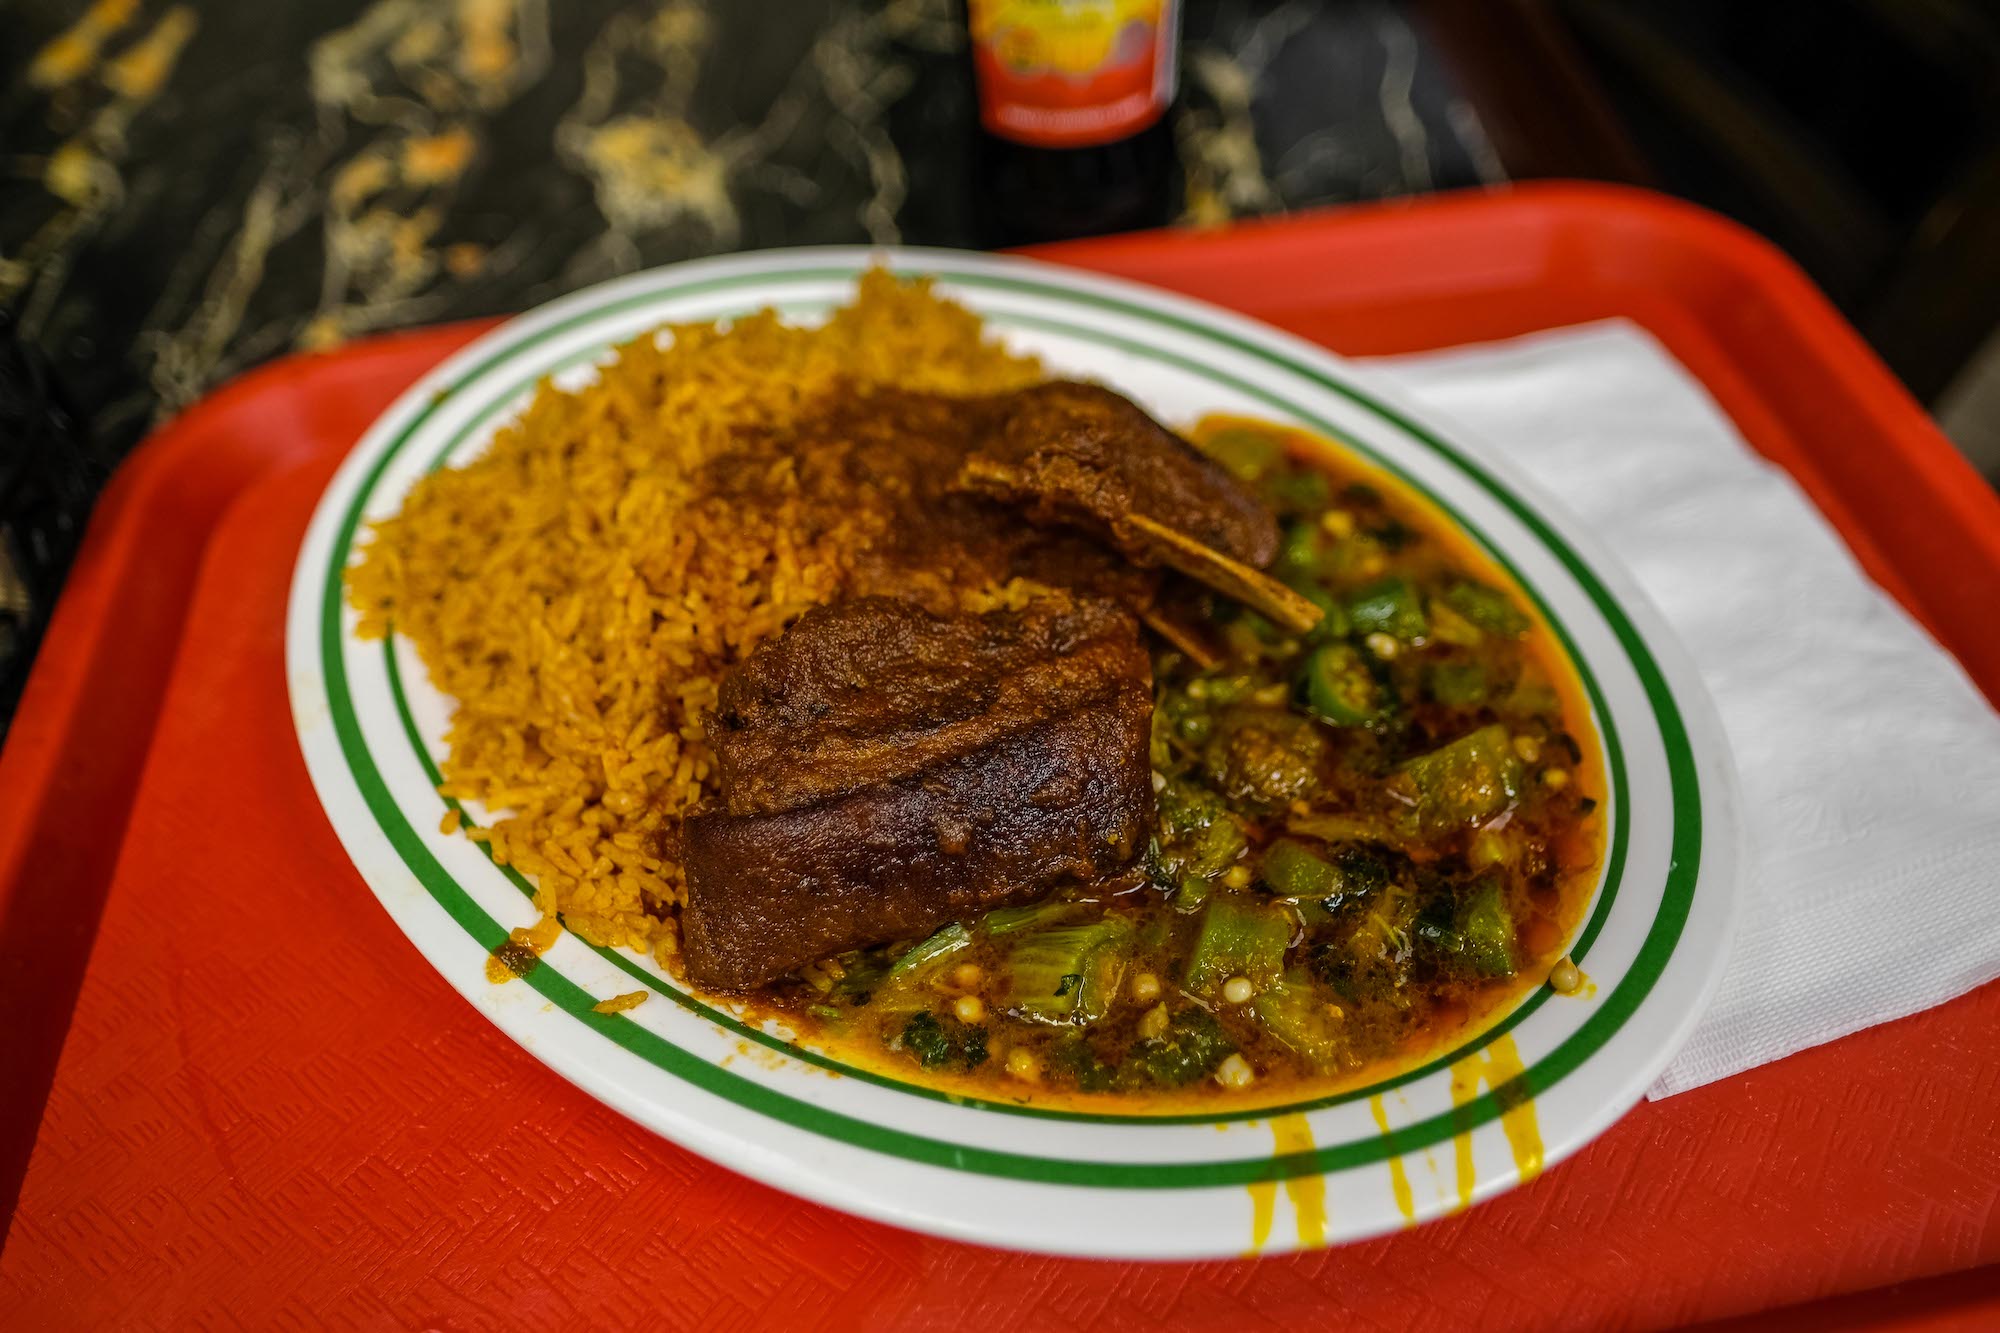 A plate of goat, with jollof and okra, on a red tray.